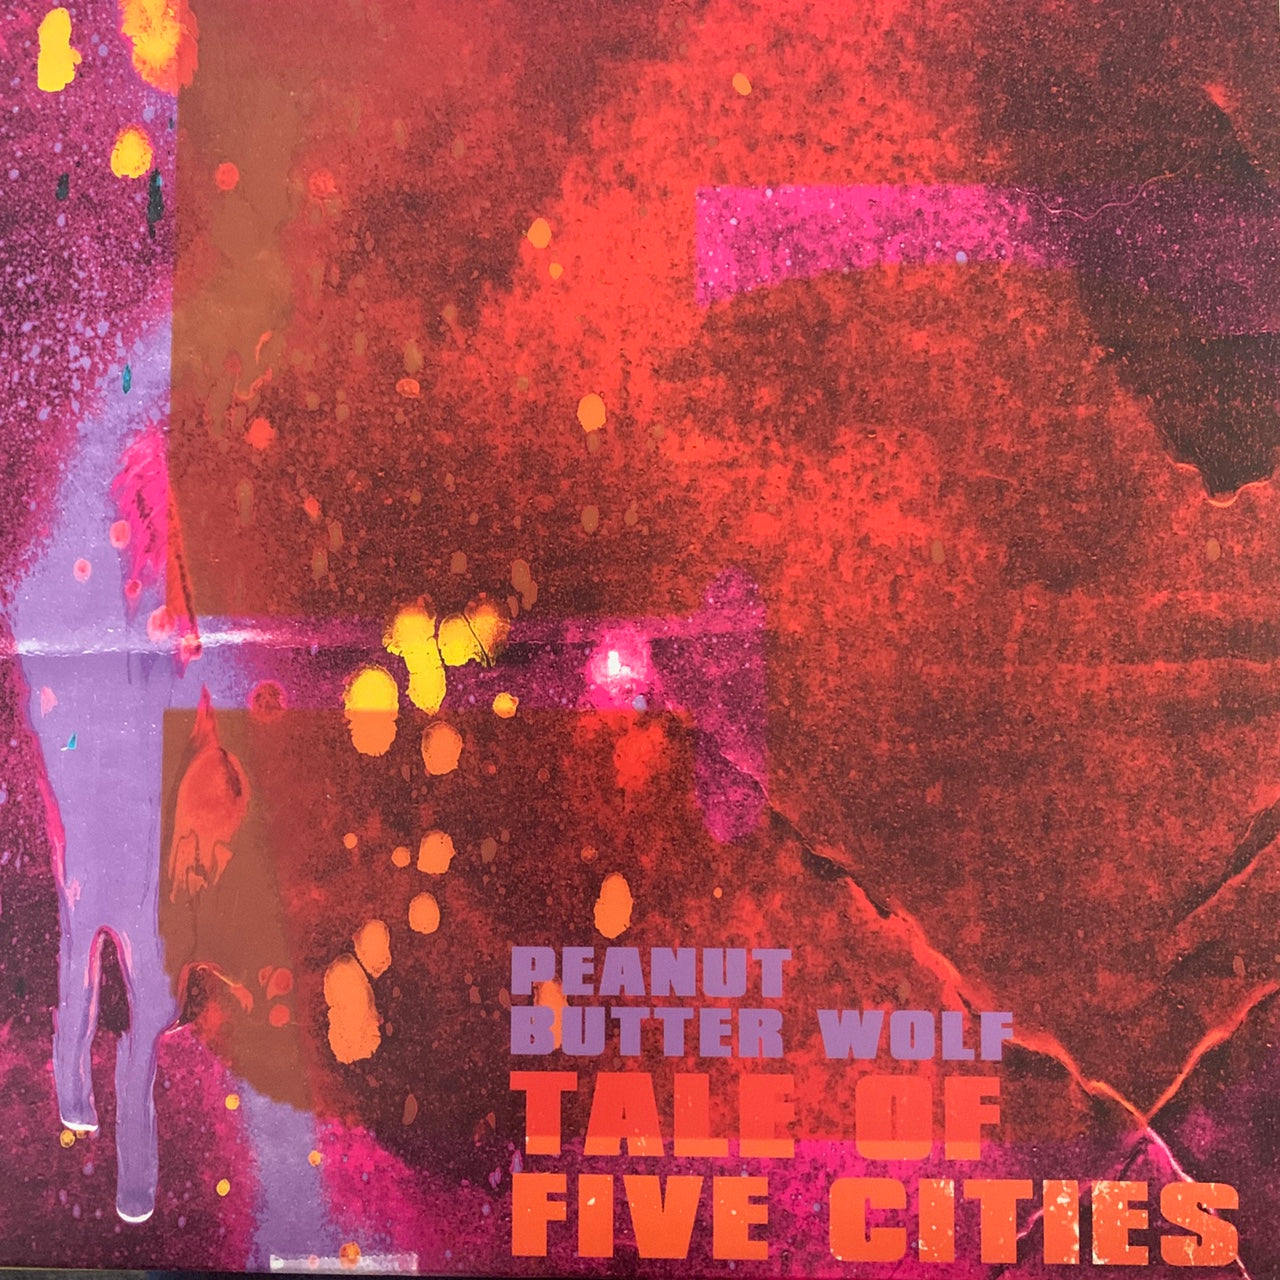 Peanut Butter Wolf “Tale Of Five Cities” 4 Track 12inch Vinyl